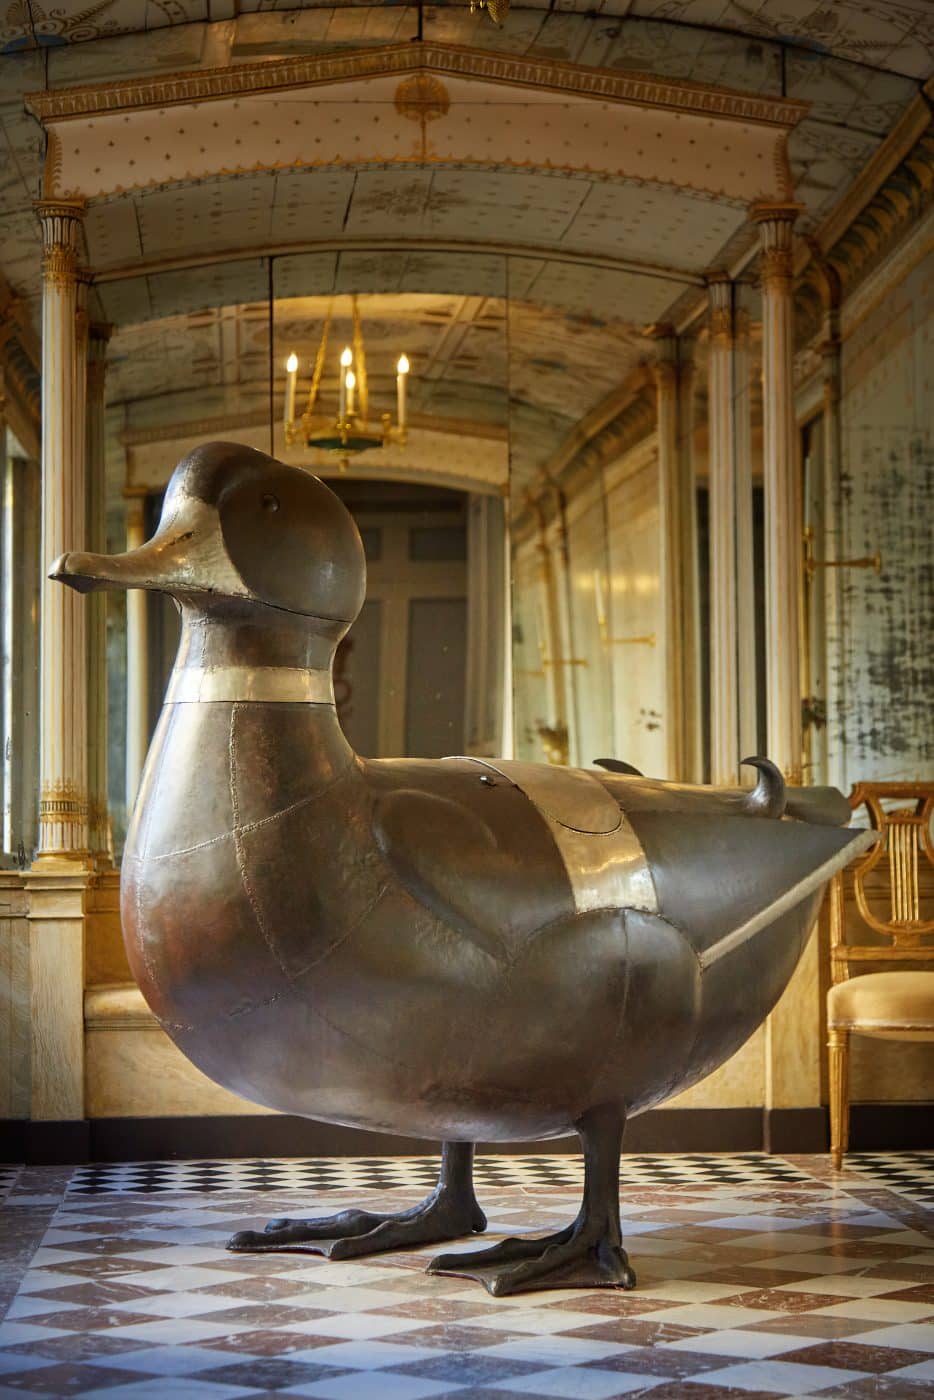 Grand Canard statue sculpture with storage compartment created by French artist and designer François-Xavier Lalanne for a private client, seen in the front hall of the owner's manor house Assouline book Lalanne: A World of Poetry